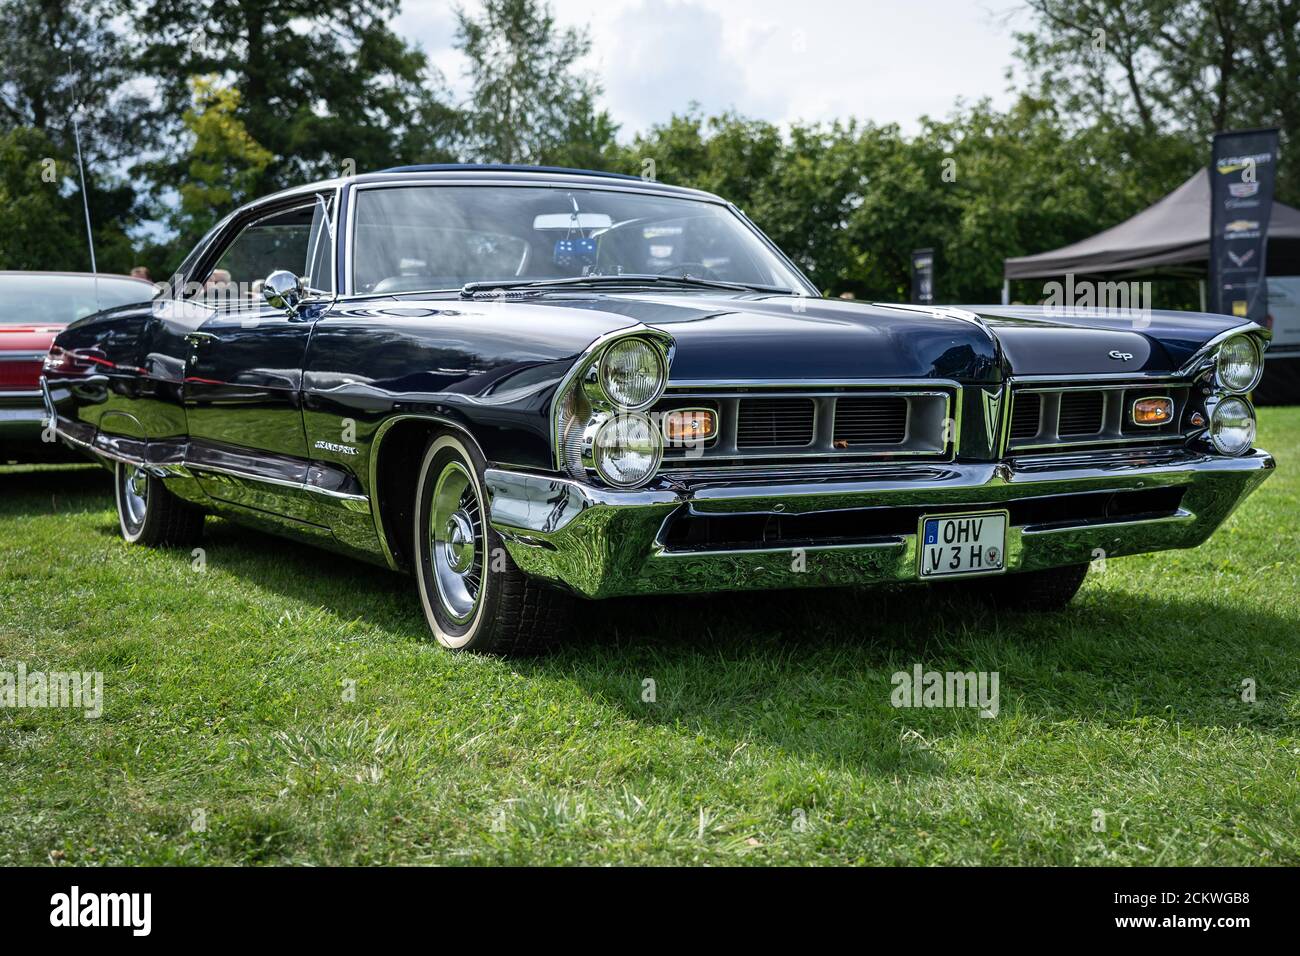 DIEDERSDORF, GERMANY - AUGUST 30, 2020: The personal luxury car Pontiac Grand Prix, 1965. The exhibition of 'US Car Classics'. Stock Photo